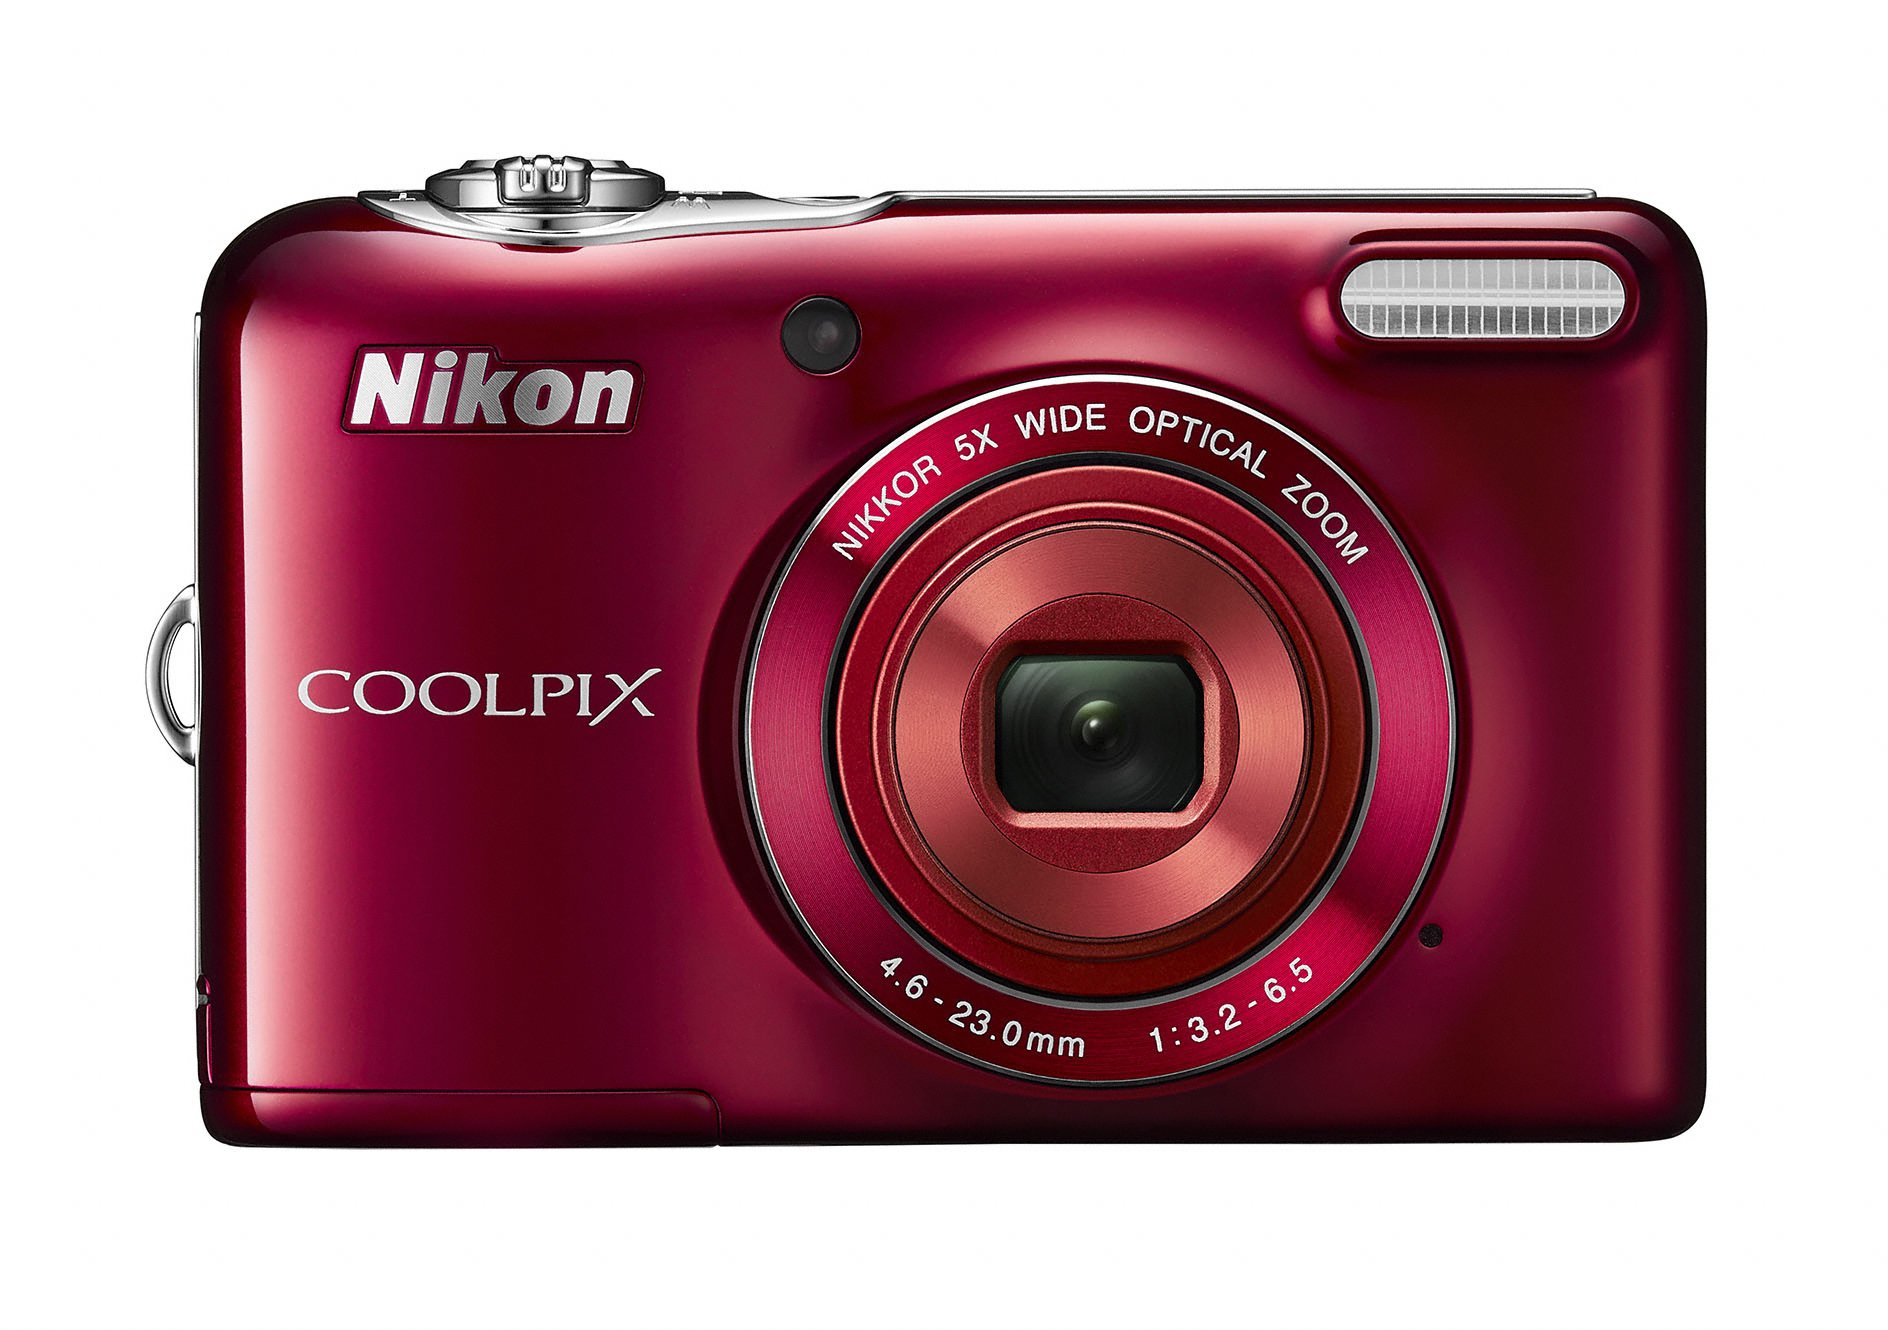 Nikon launches 9 new compact cameras at CES'14